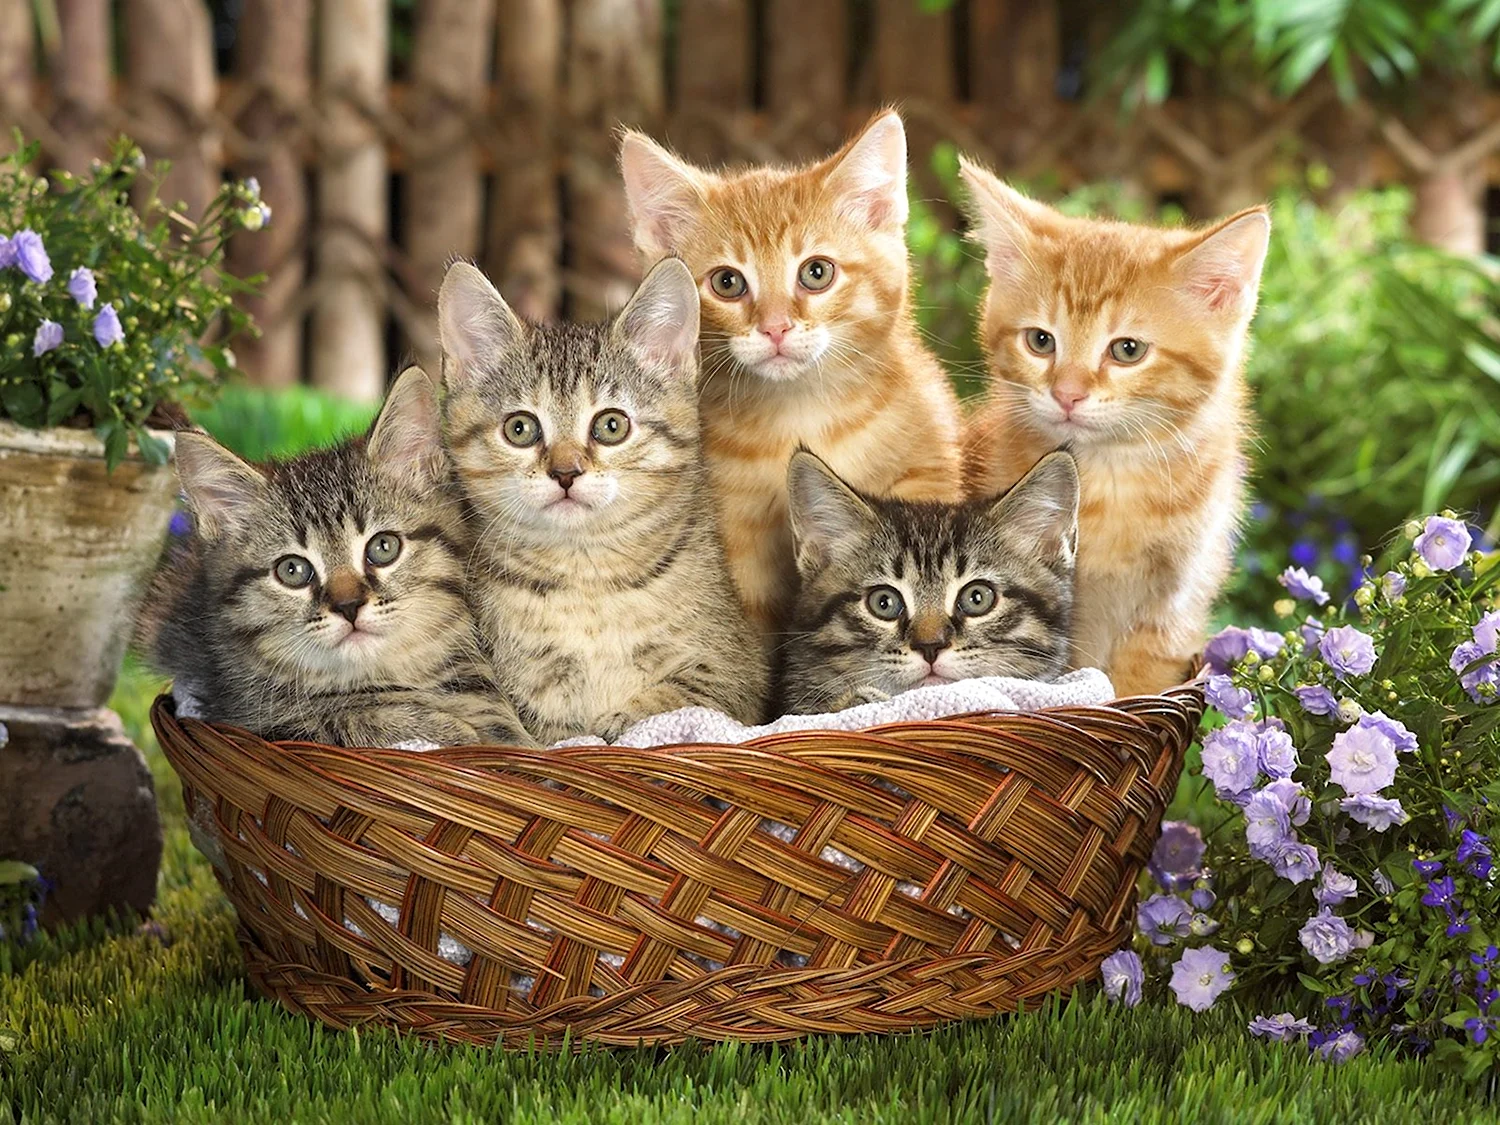 Kittens in a Basket Photographic Print on Canvas